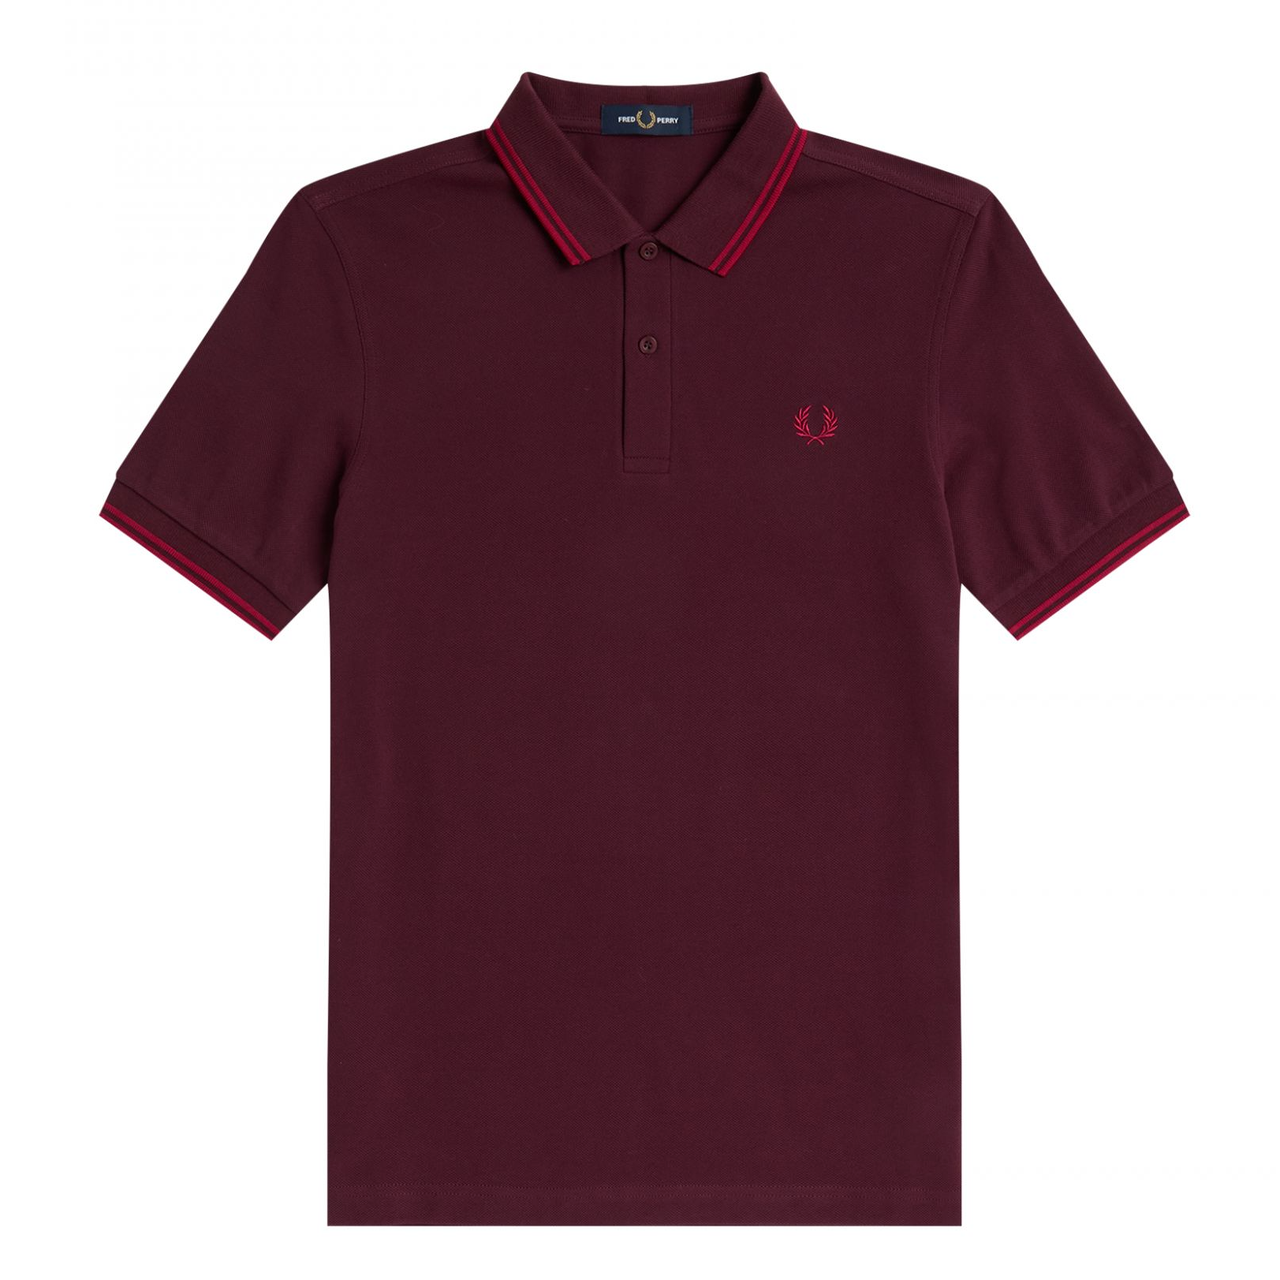 FRED PERRY TWIN TIPPED POLO SHIRT MAHOGANY/CLARET